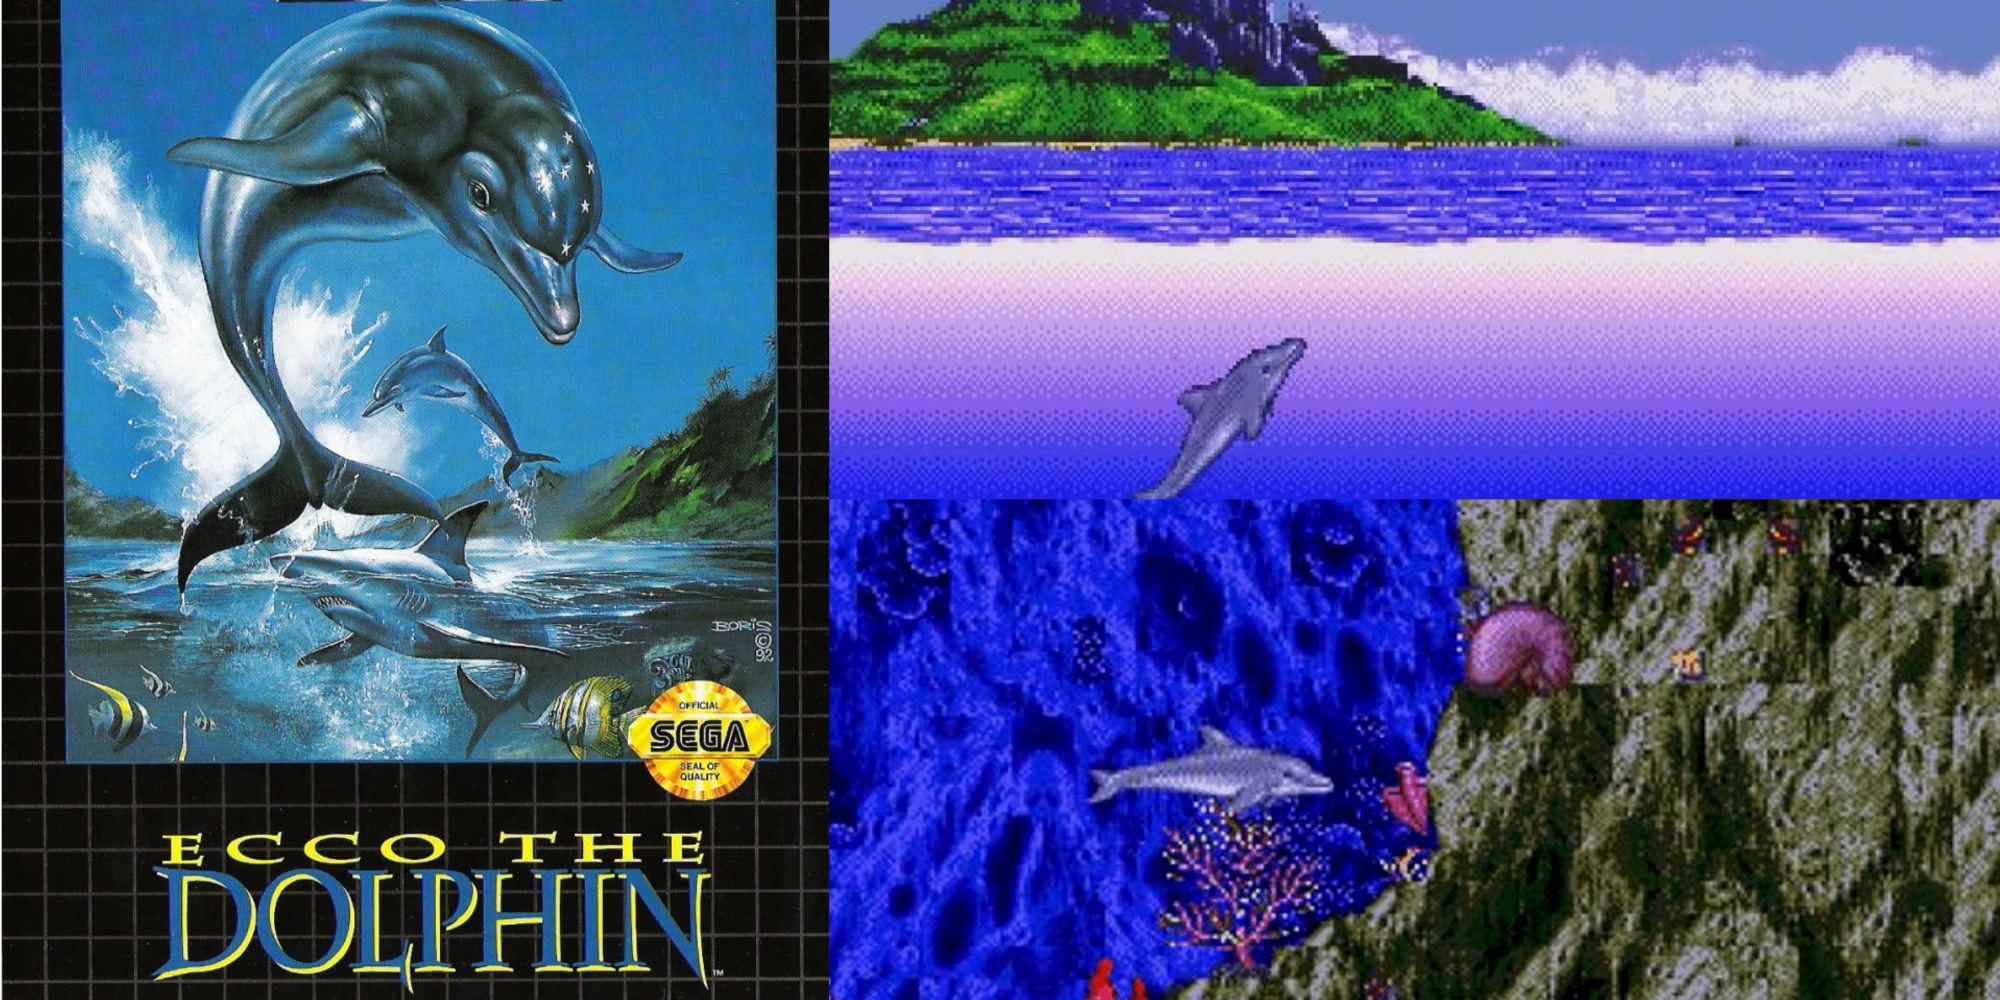 Ecco the dolphin cover art and screenshots of gameplay